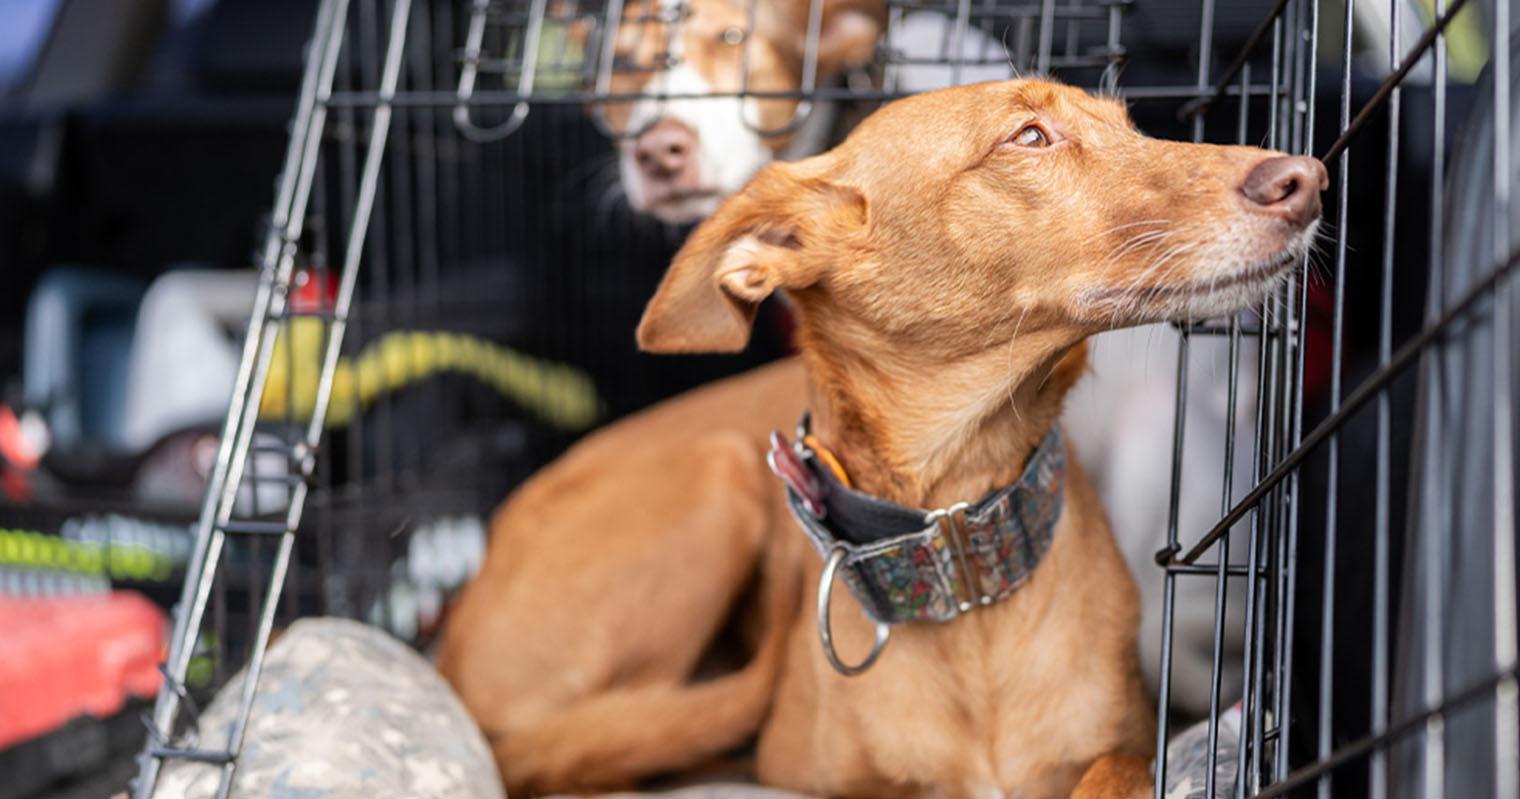 Pet Adoption Transport Services: Transporting Pets Across Country